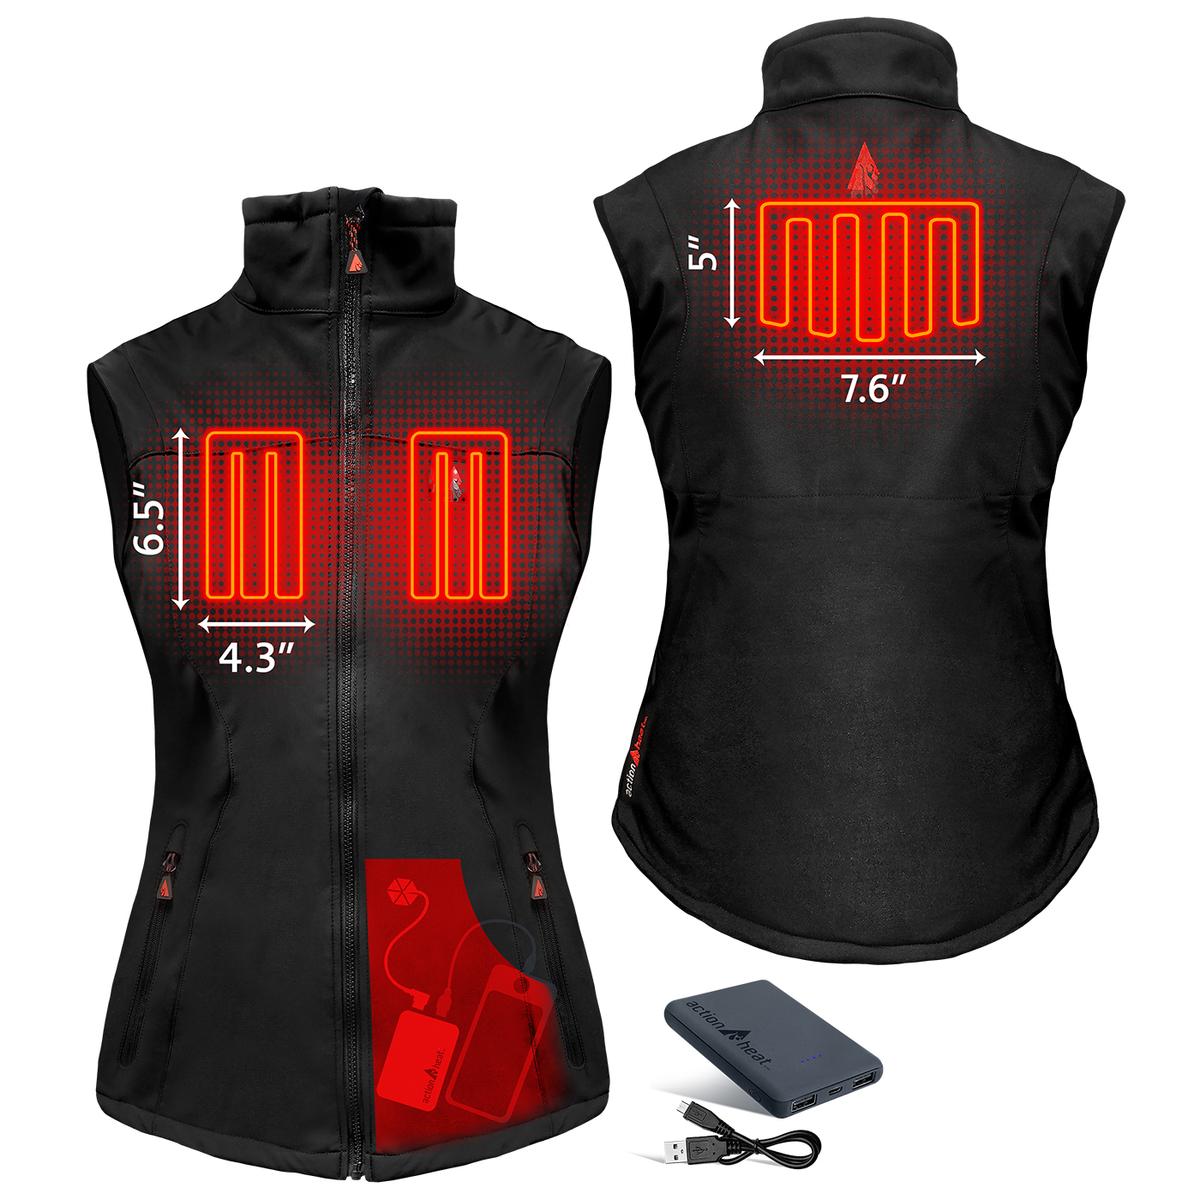 Heated Jackets for Women, Heated Vests for Women – ActionHeat Heated Apparel